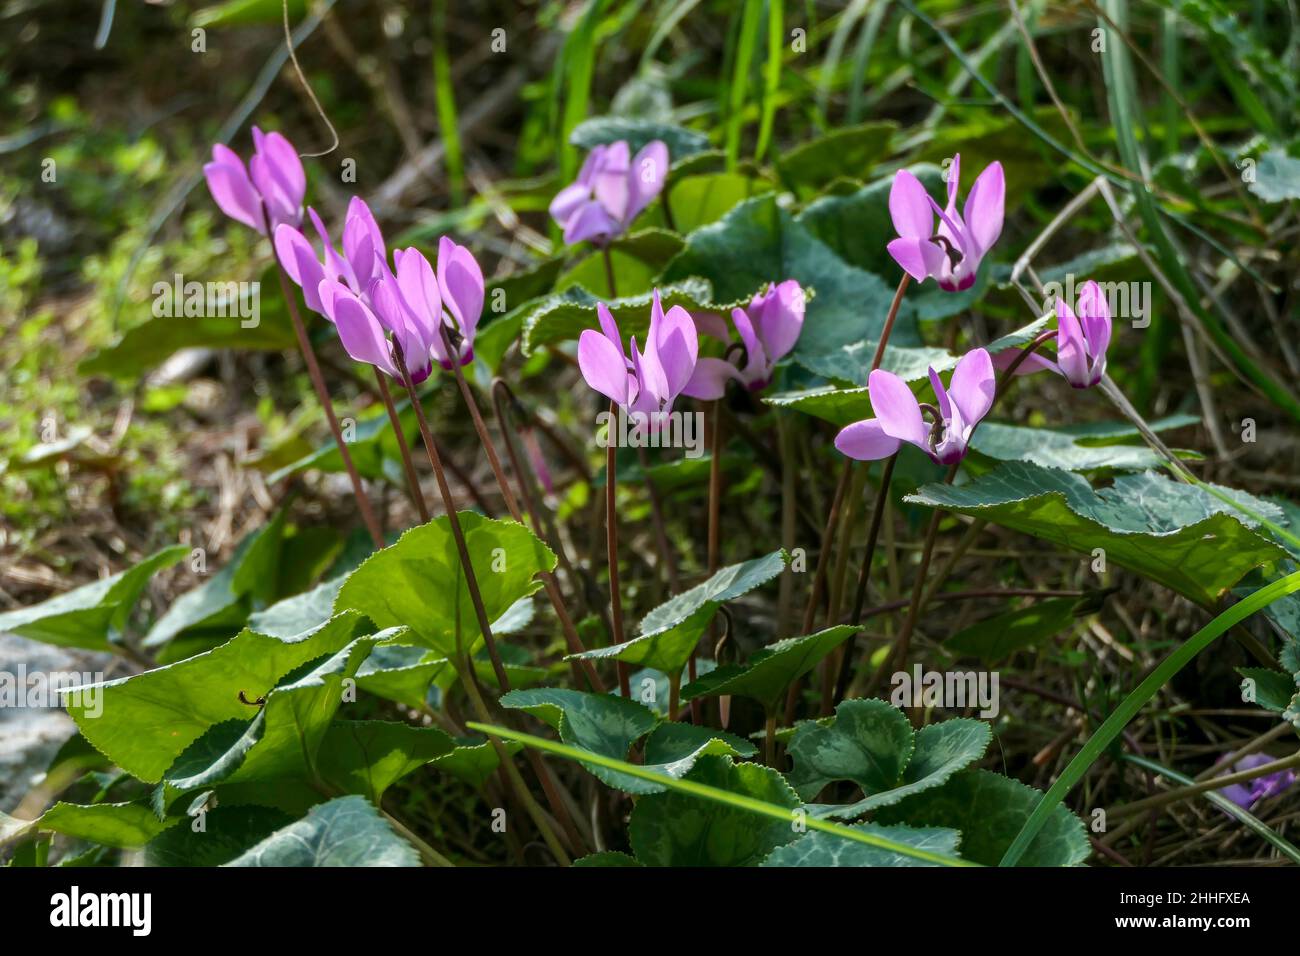 Pink flowers and buds of Cyclamen closeup on a blurred background of green grass. selective focus Stock Photo